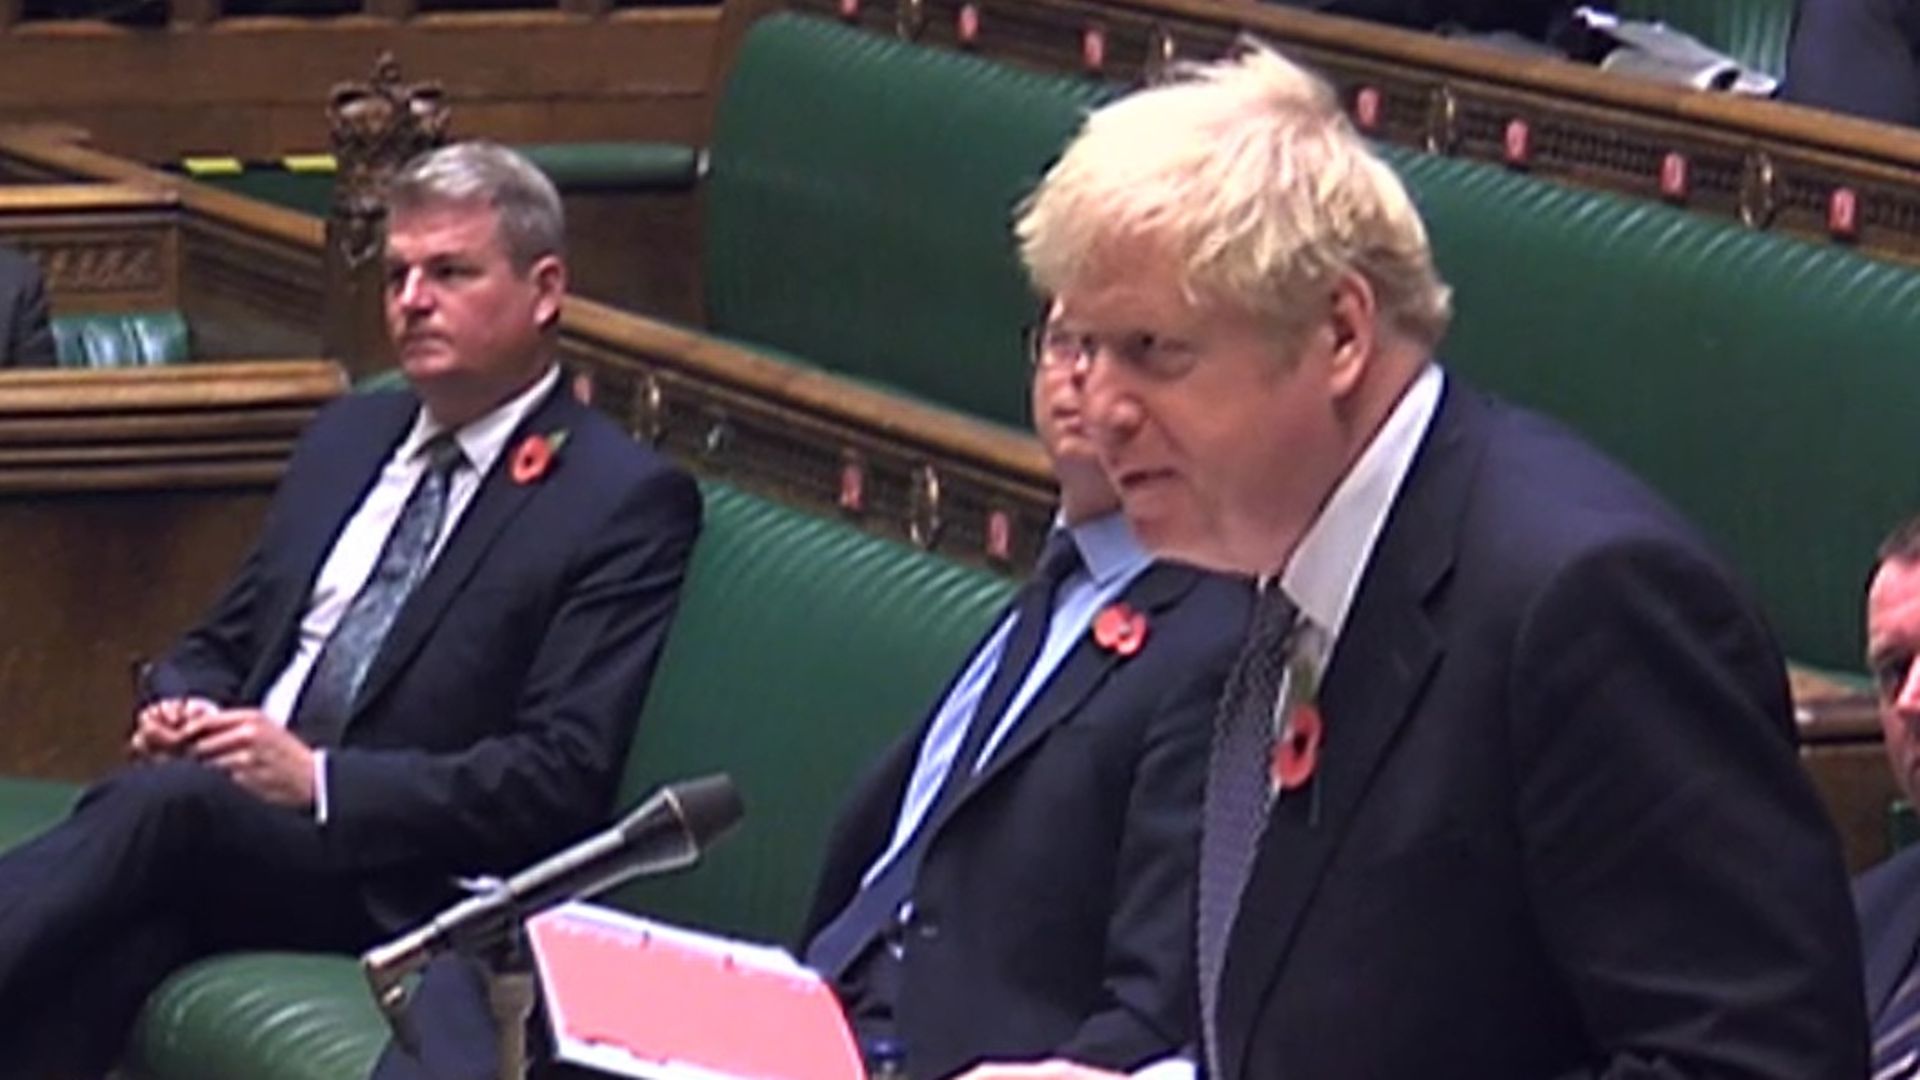 Boris Johnson appearing at prime minister's questions in the House of Commons - Credit: Parliament